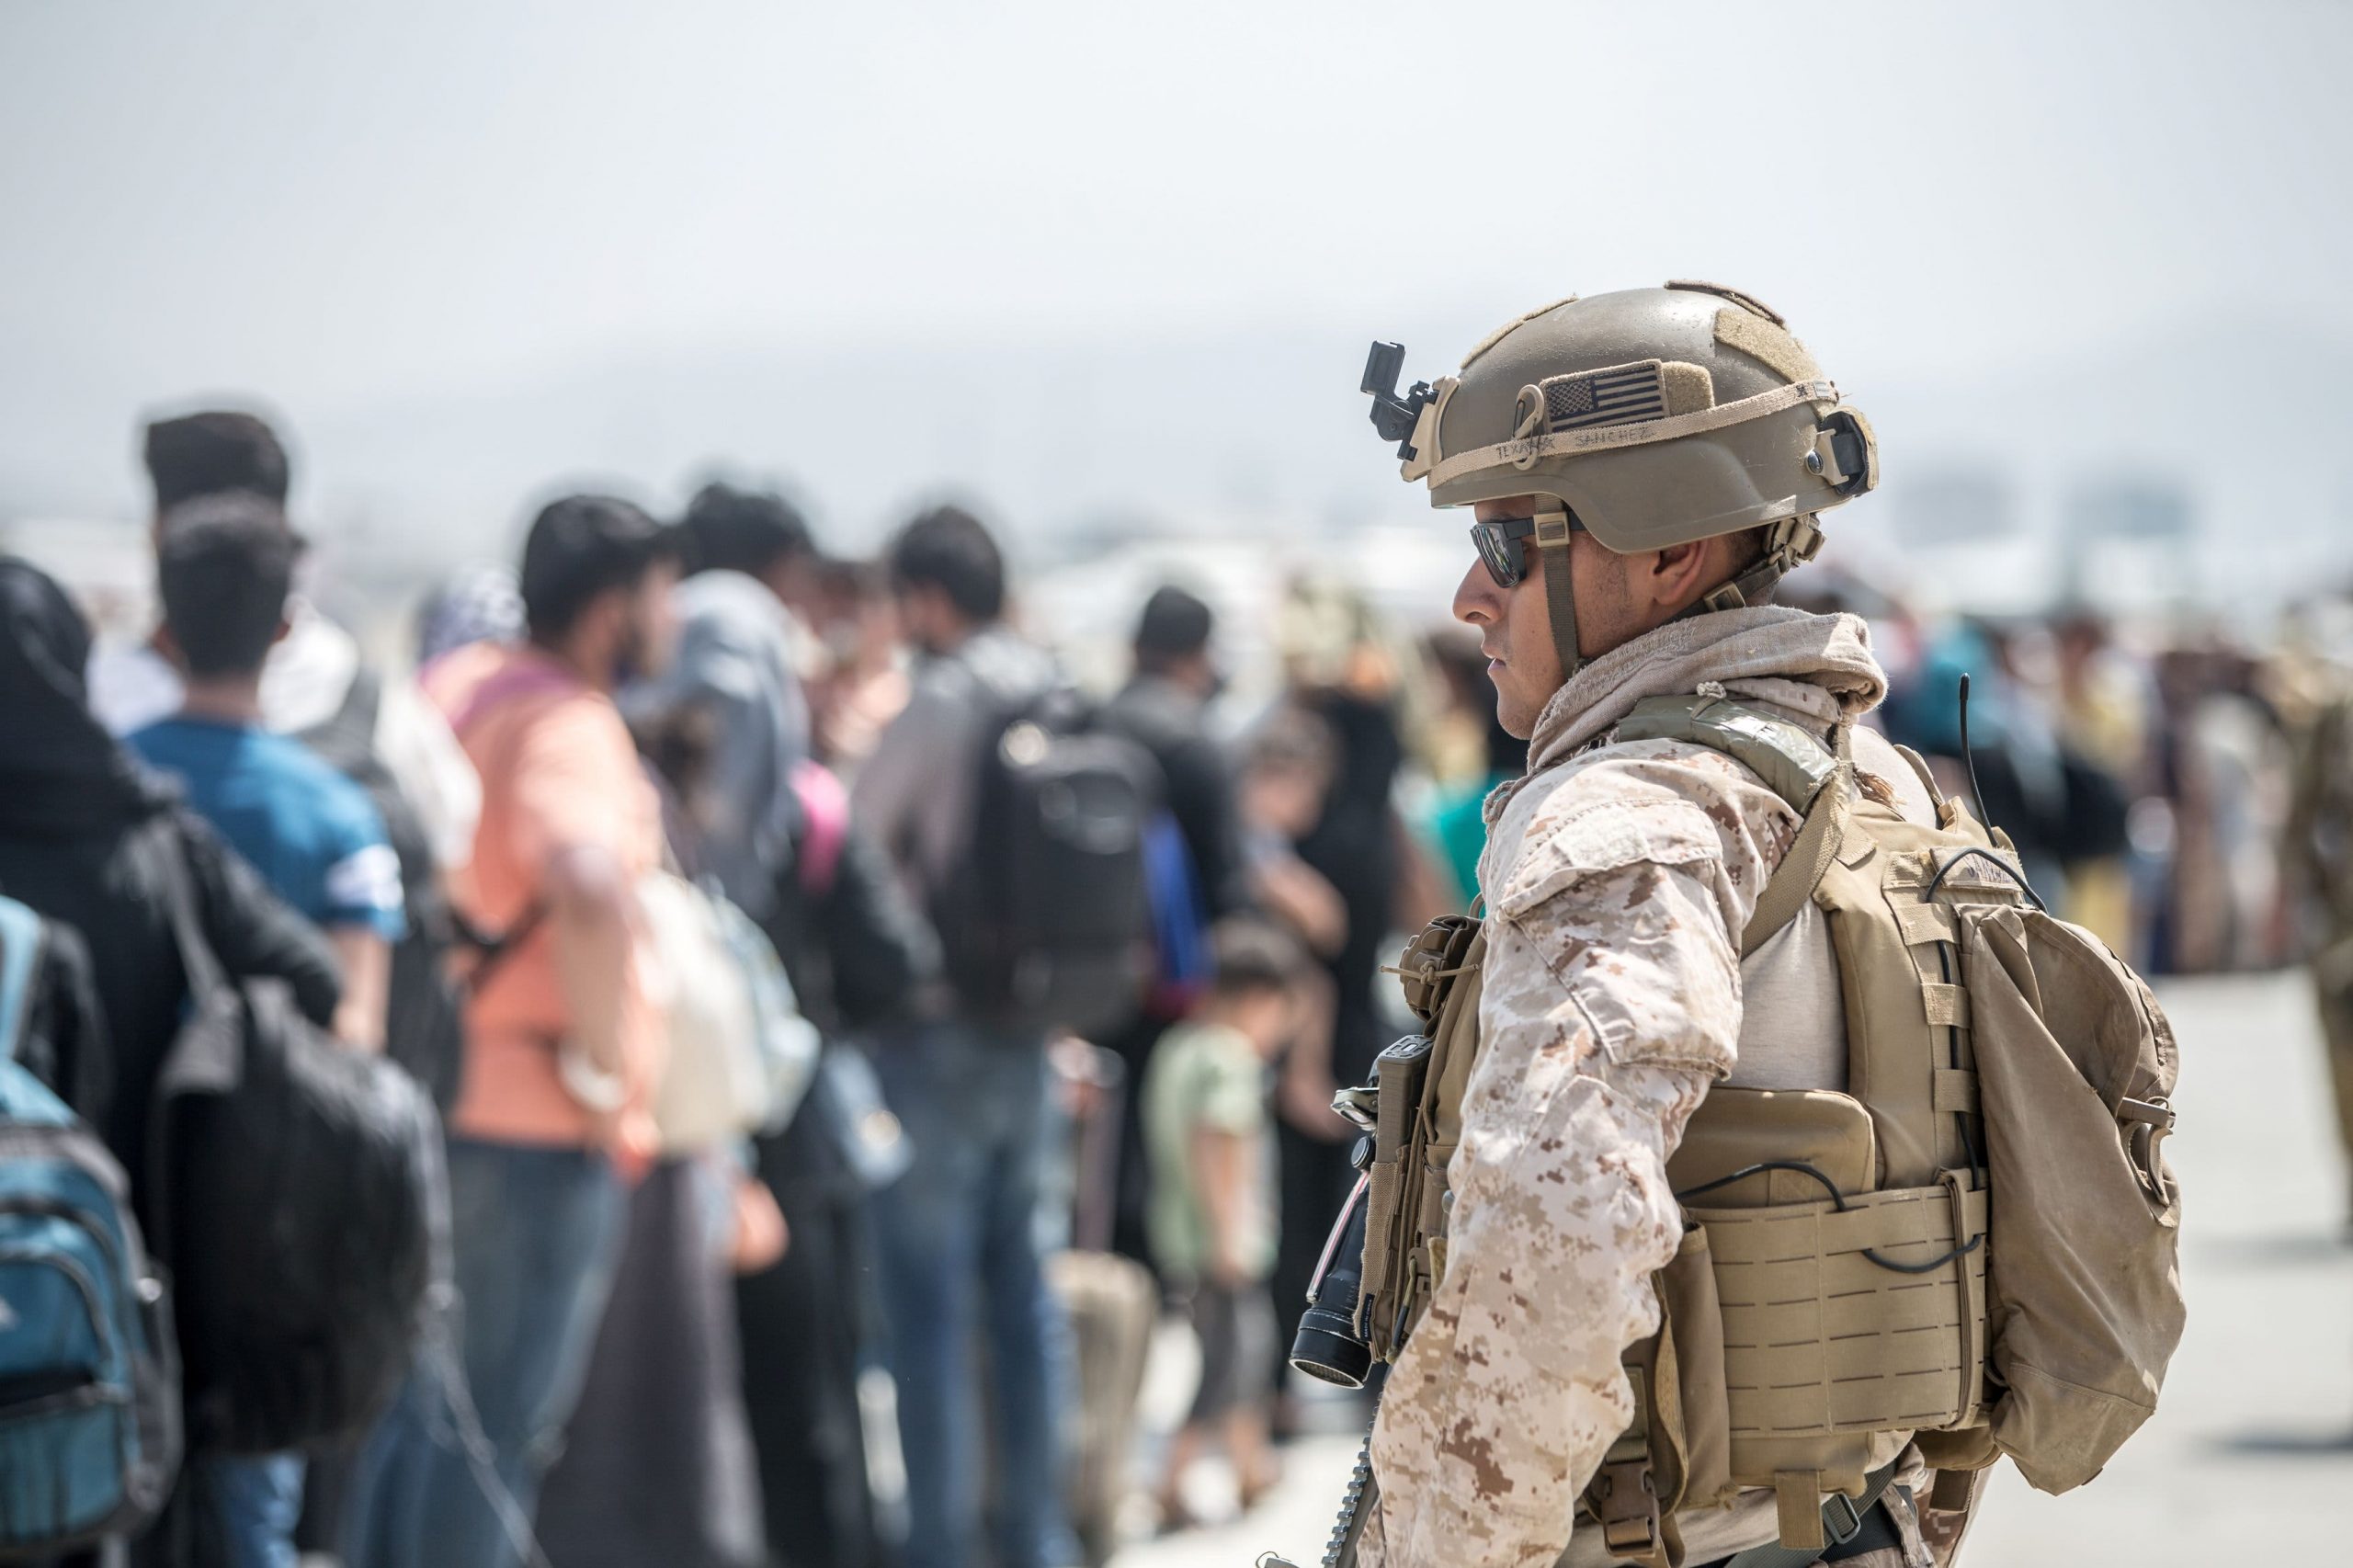 A U.S. soldier stands in the foreground in military gear and helmet. In the background, a line of Afghans.